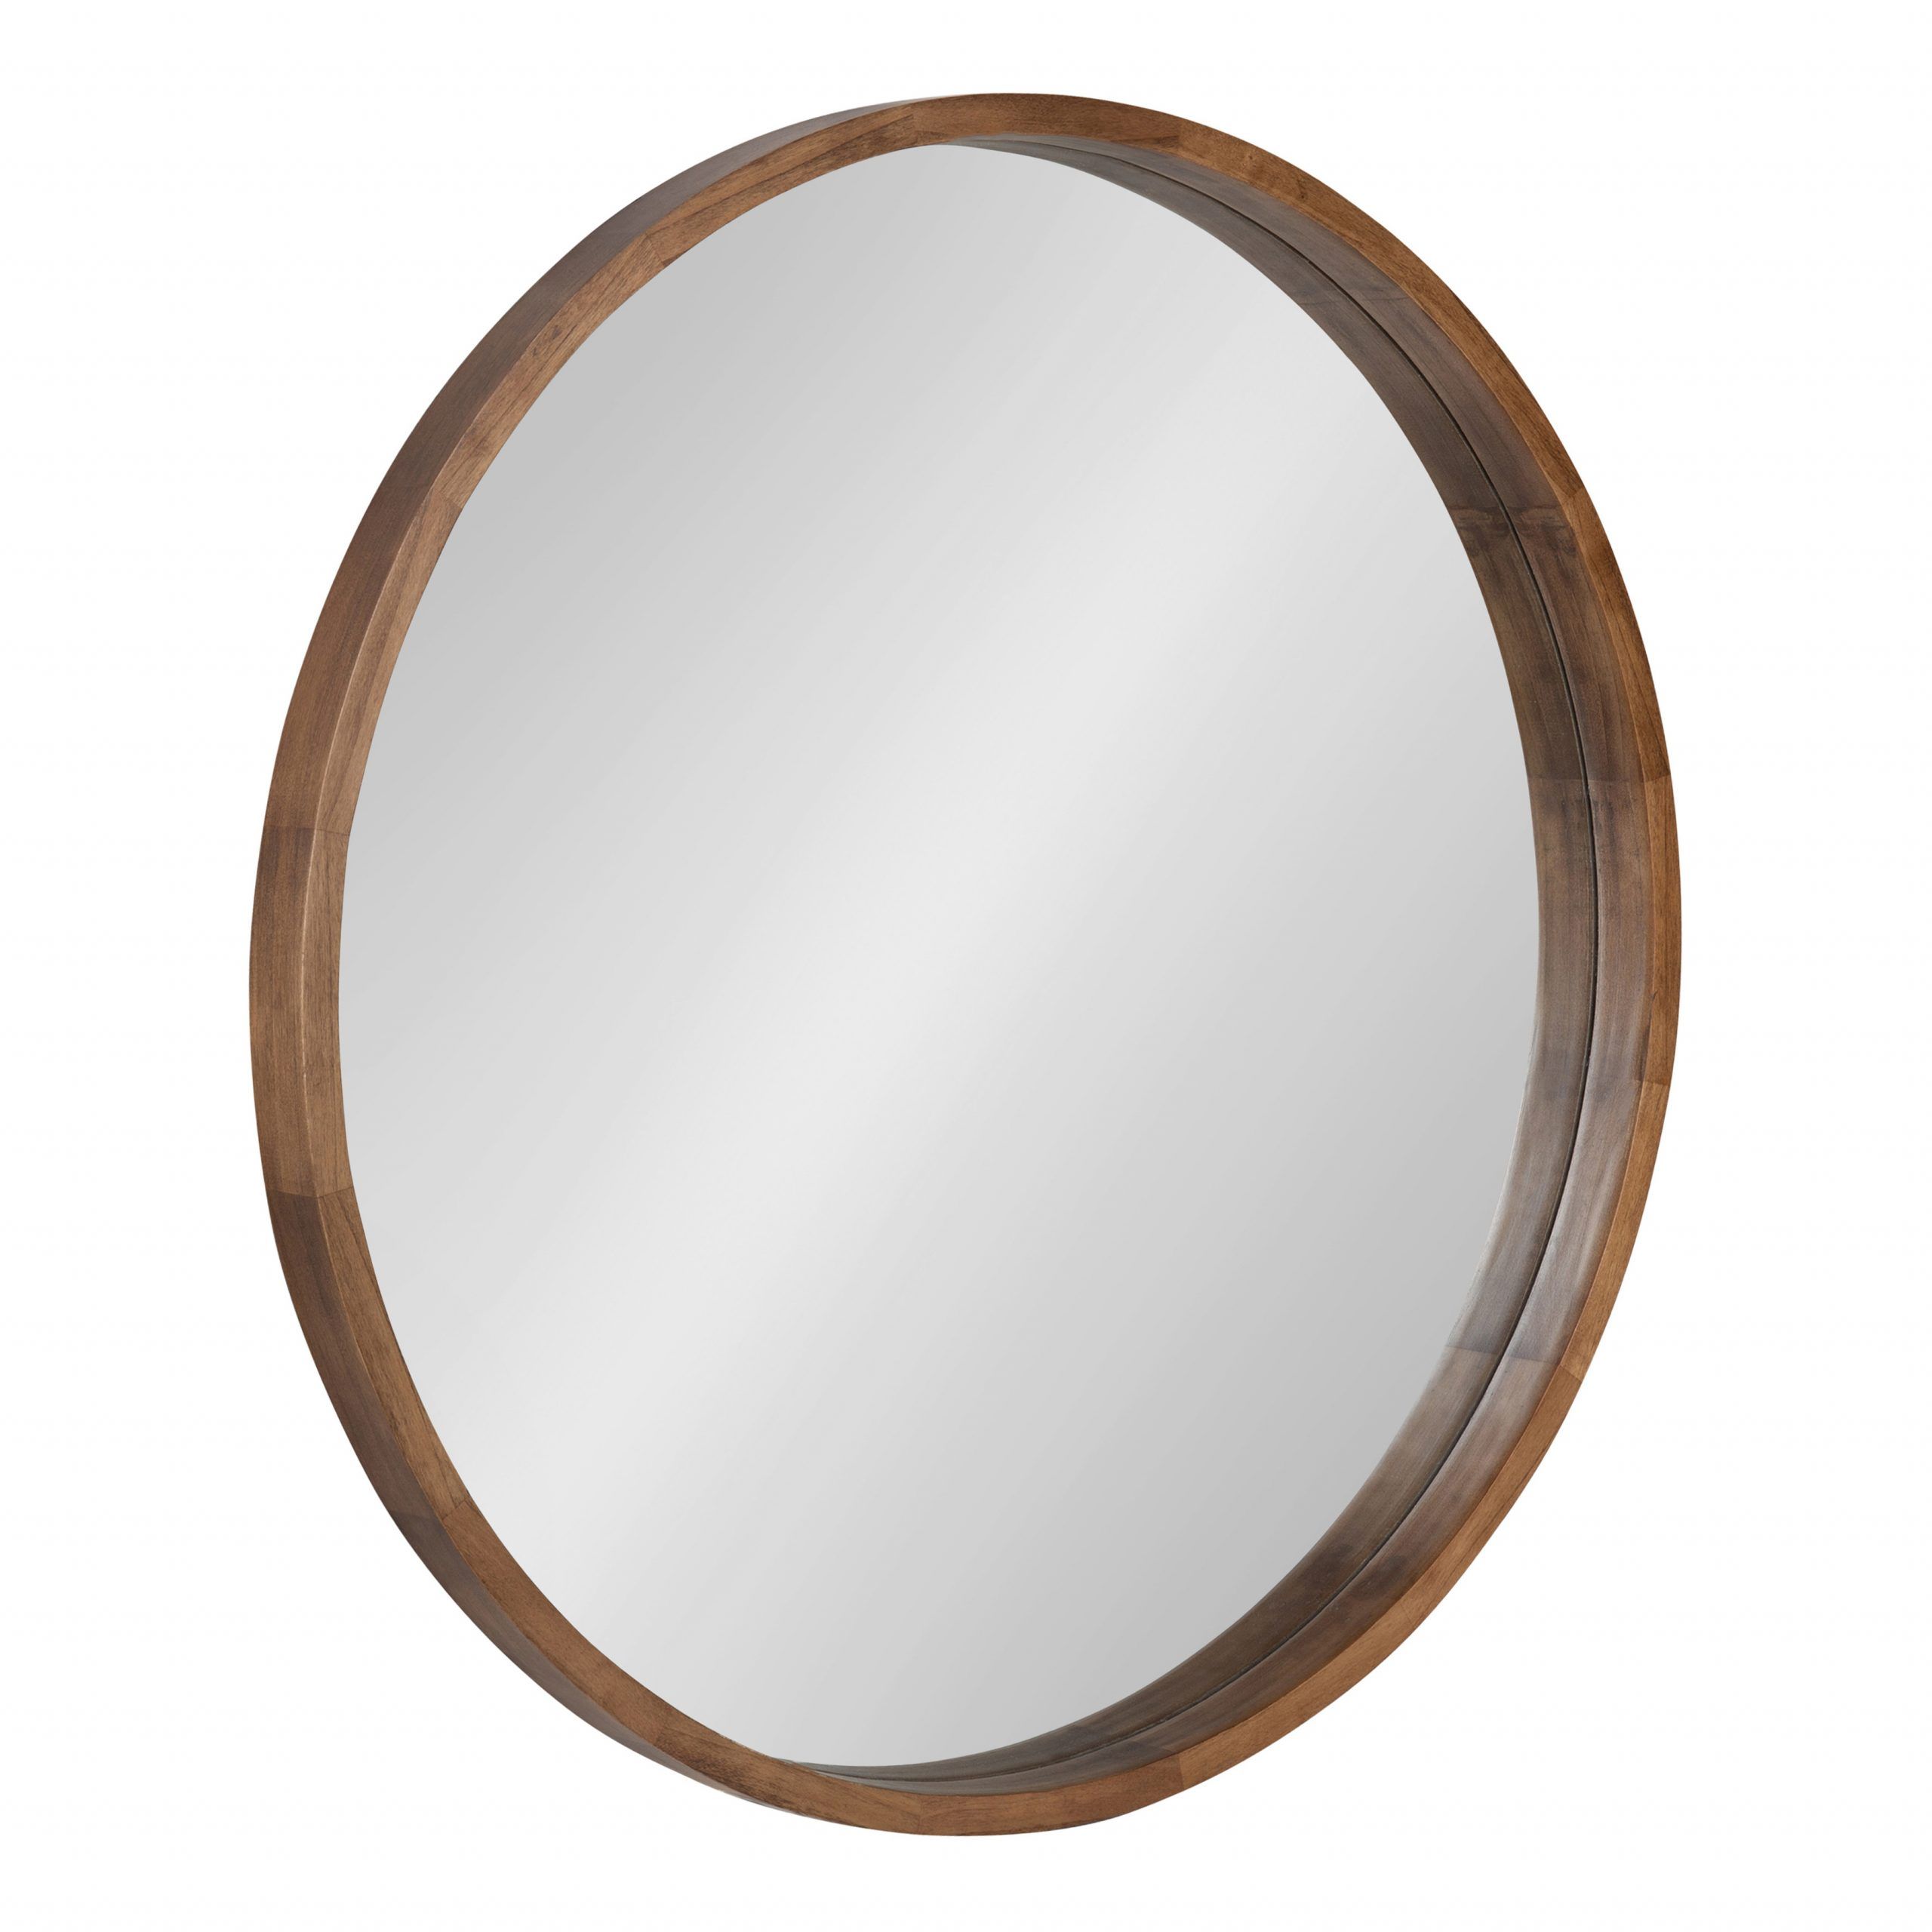 Kate And Laurel Hutton Round Wood Framed Wall Mirror, 36" Diameter Intended For Mocha Brown Wall Mirrors (View 5 of 15)